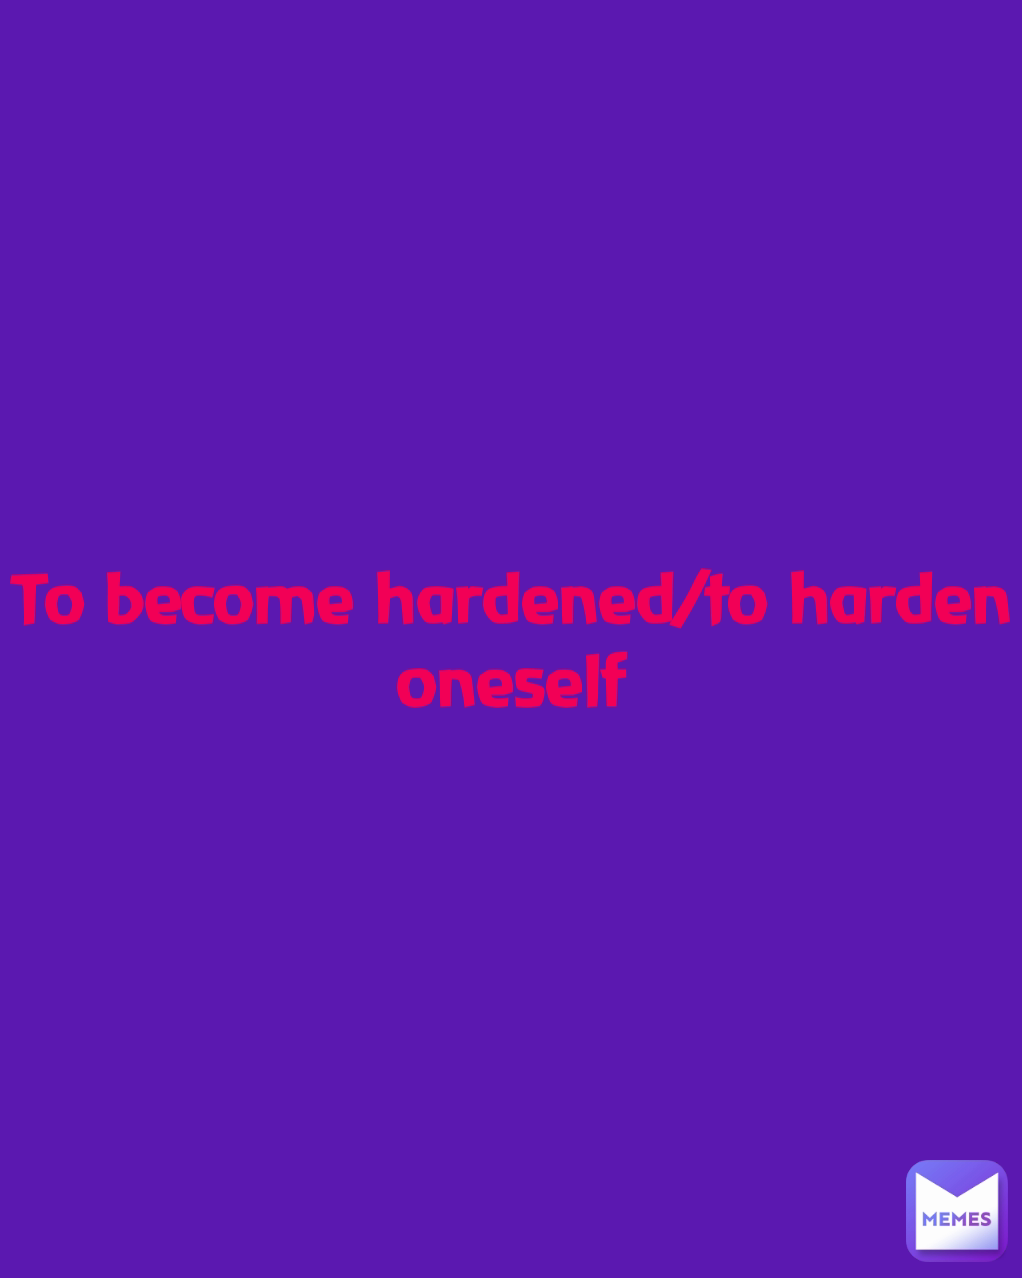 To become hardened/to harden oneself